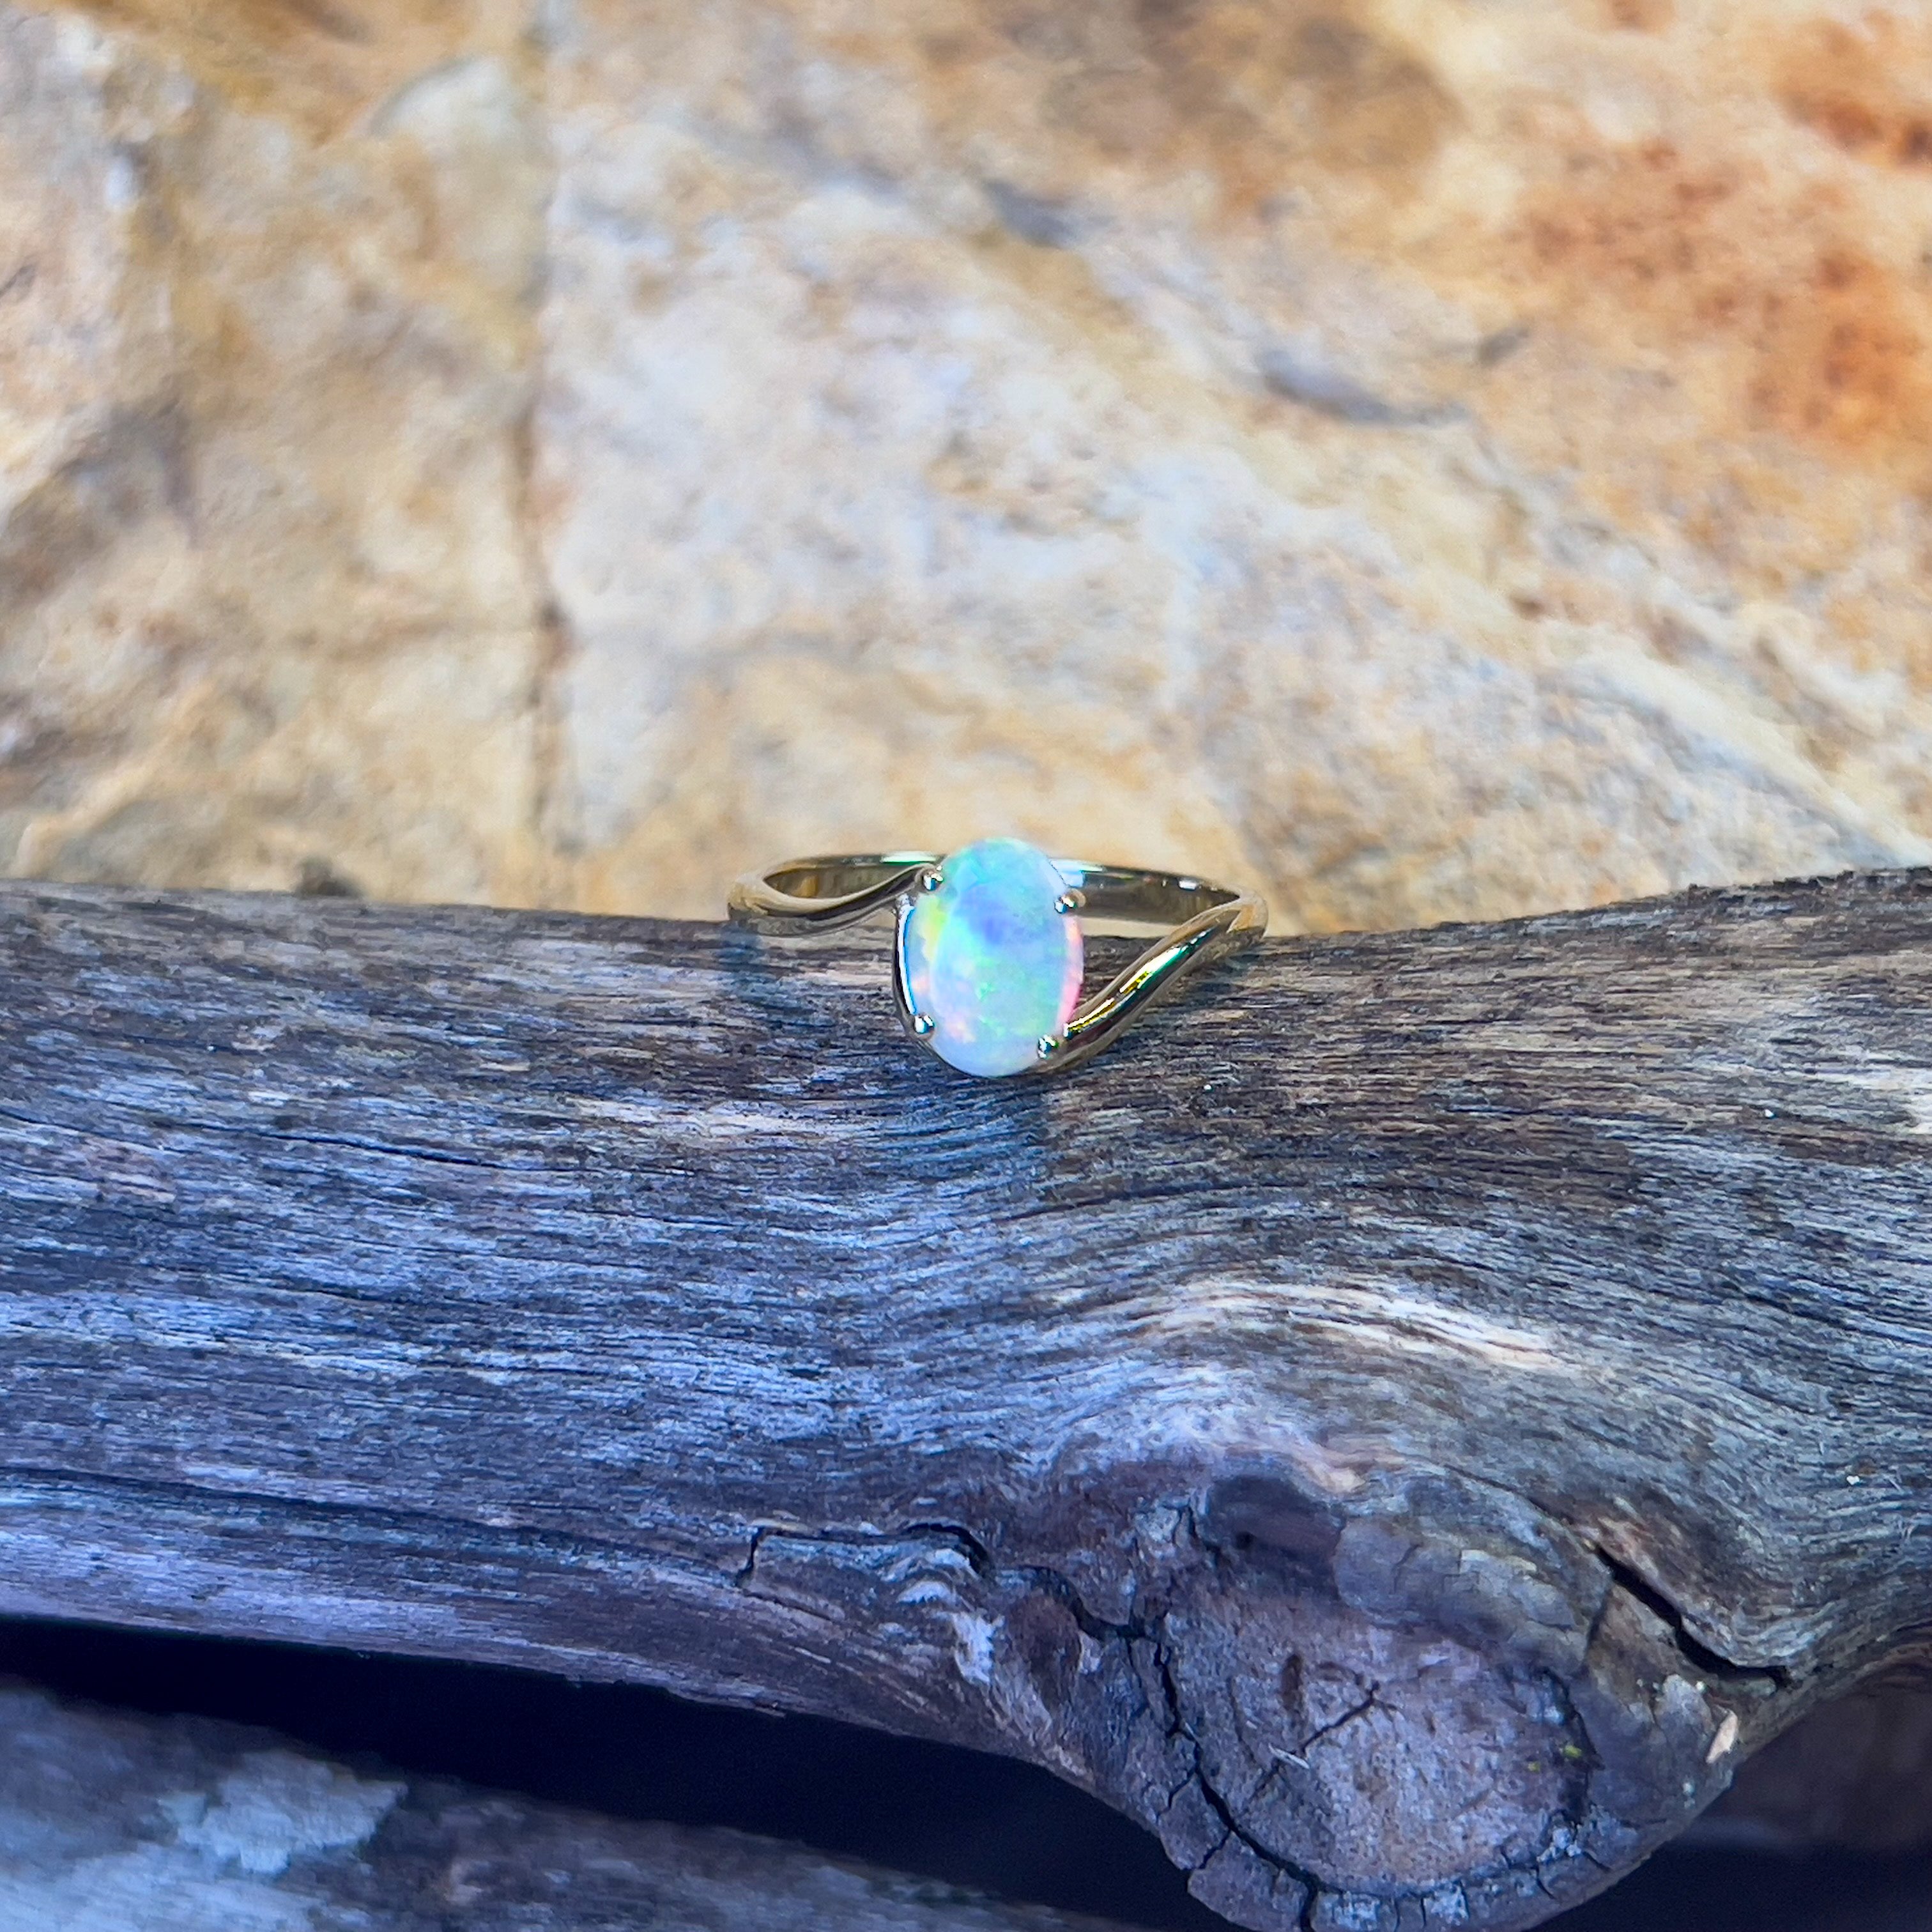 14kt Yellow Gold crossover ring with one 0.55ct Crystal Opal - Masterpiece Jewellery Opal & Gems Sydney Australia | Online Shop